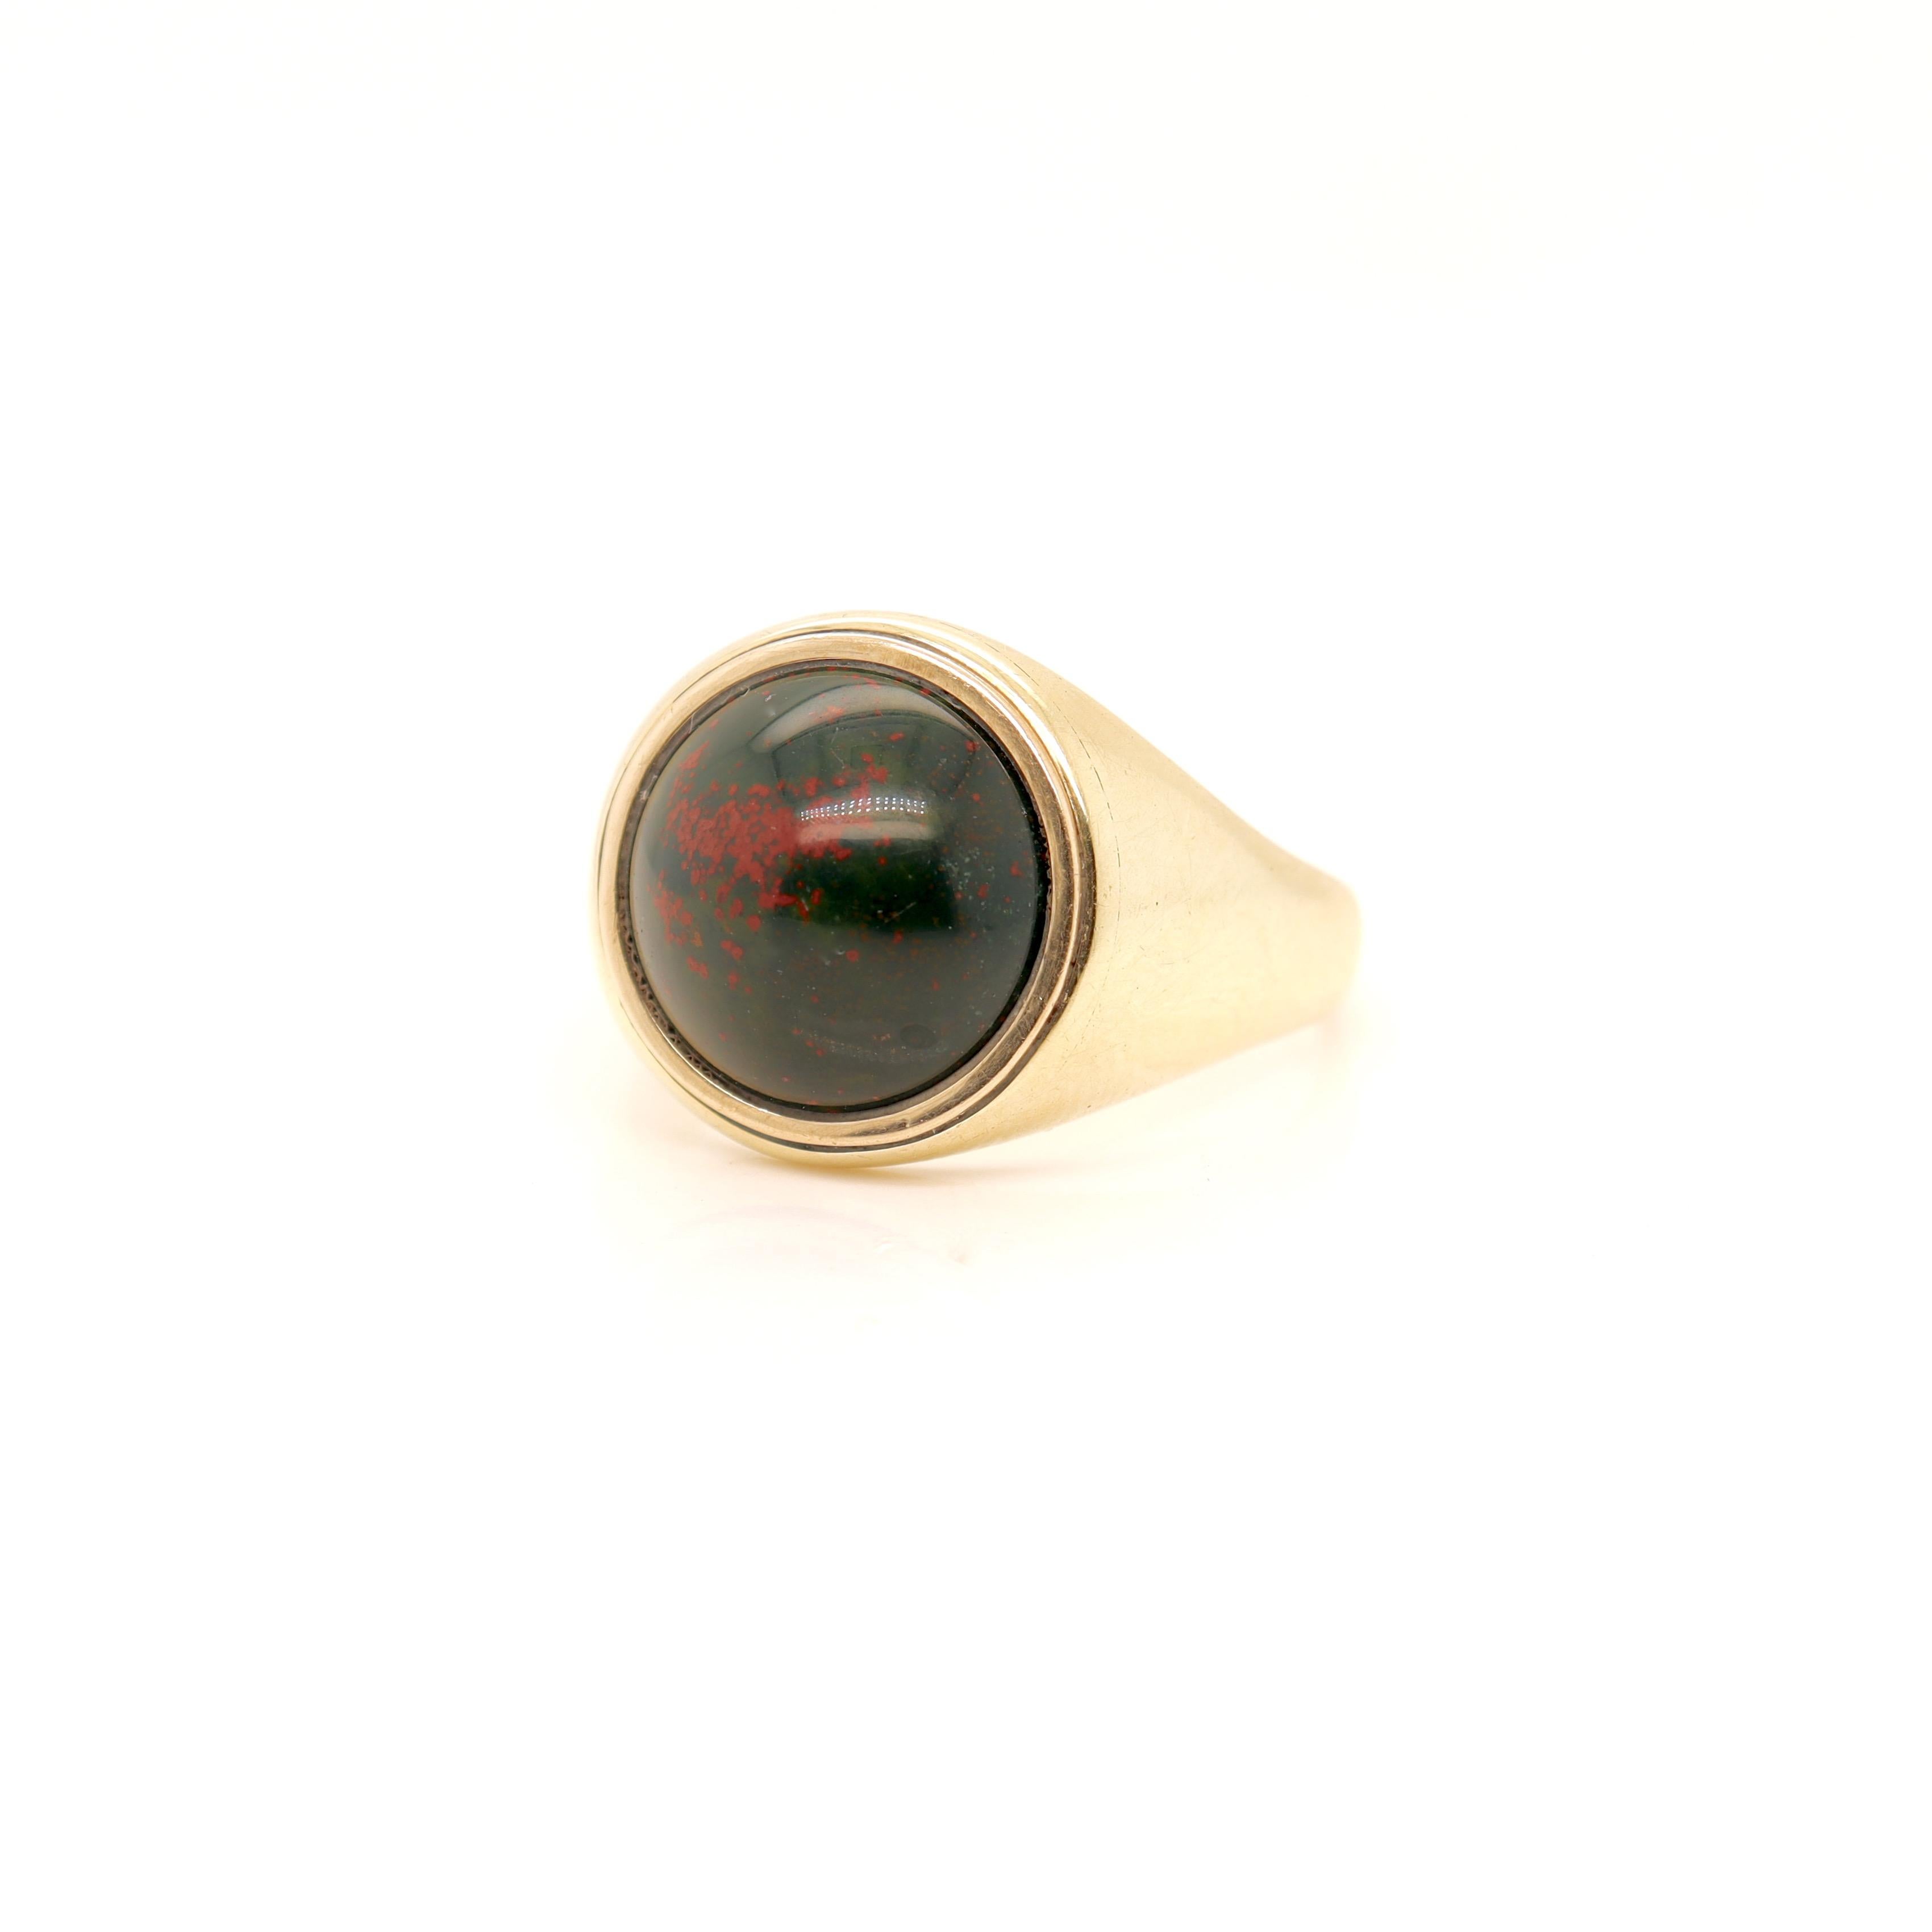 A fine Edwardian gold & bloodstone cabochon ring.

In 14K gold.

By Marcus & Co.

Set with a fine bloodstone cabochon. 

The stone is high set in its bezel and the ring's shoulders and sides taper to a thin shank at the back.

Marked with an etched